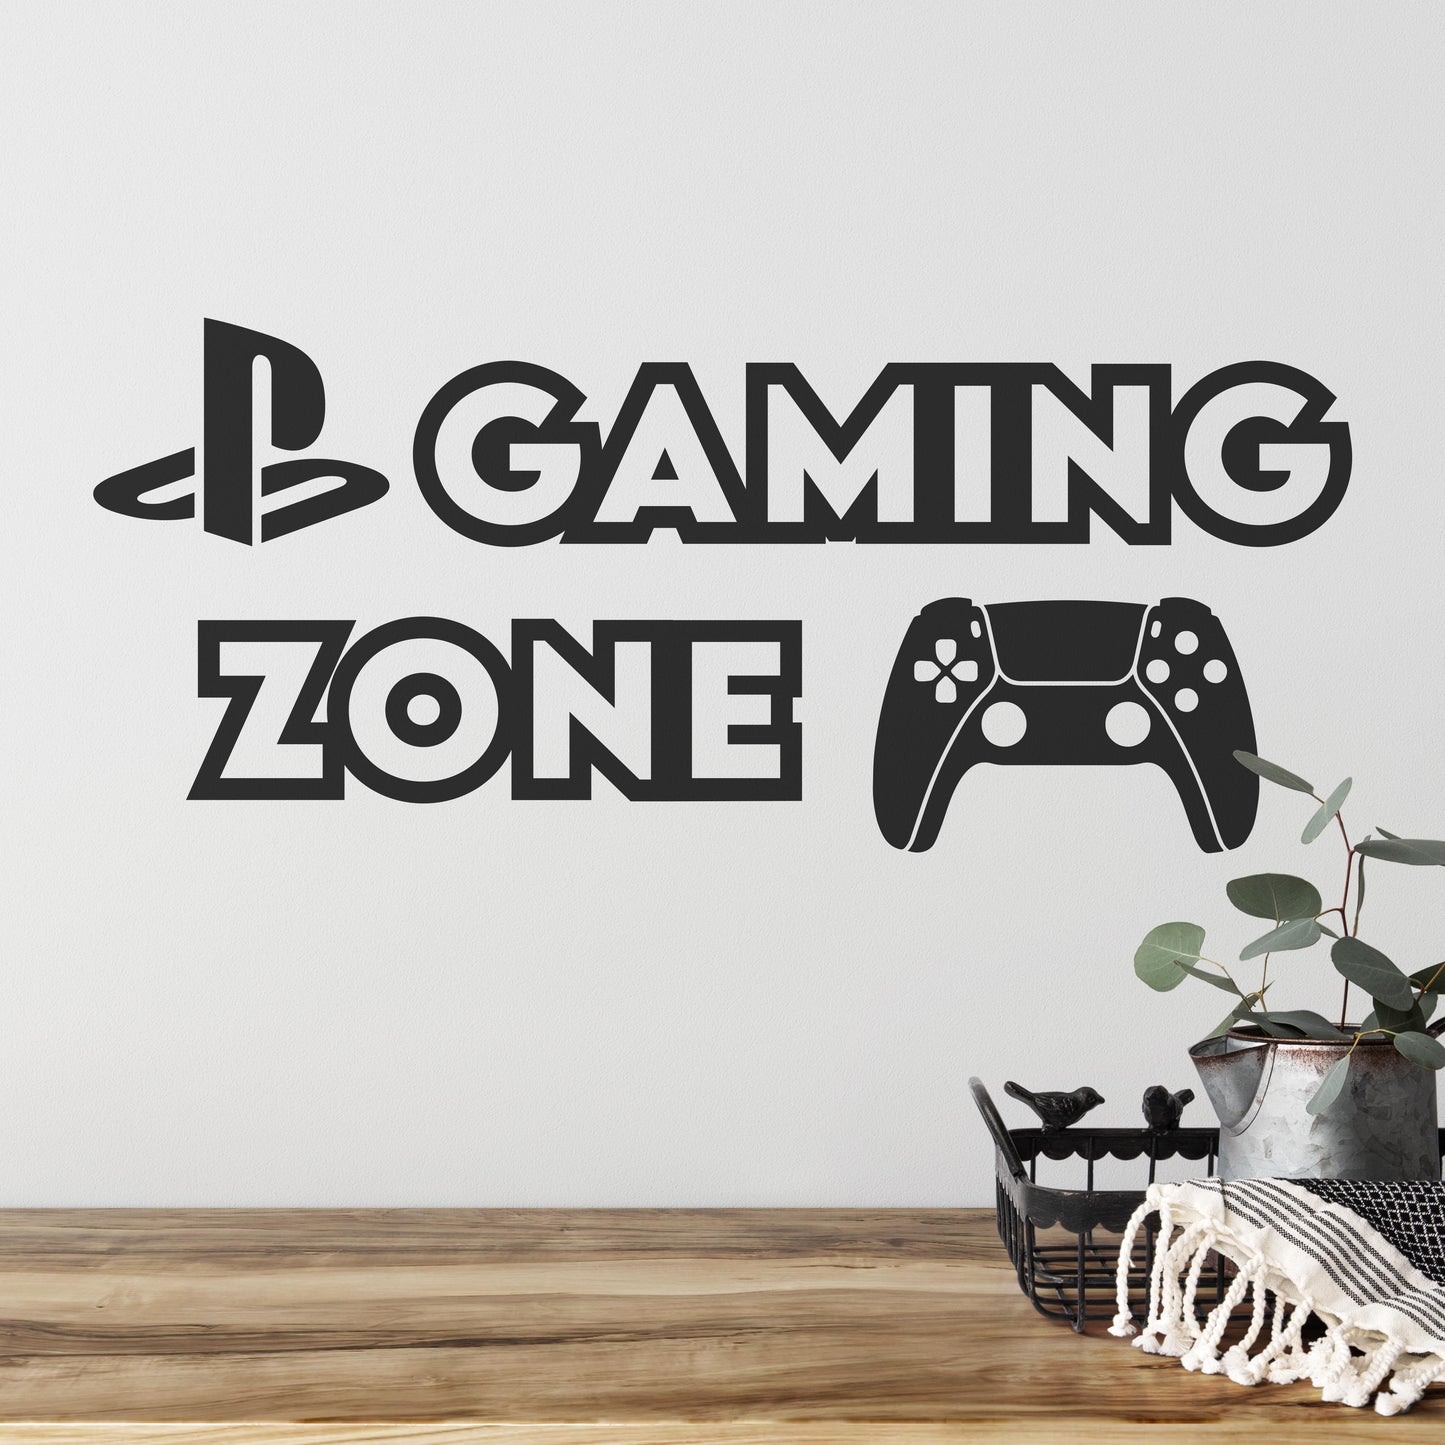 Gaming Zone Playstation Wall Sticker | Apex Stickers